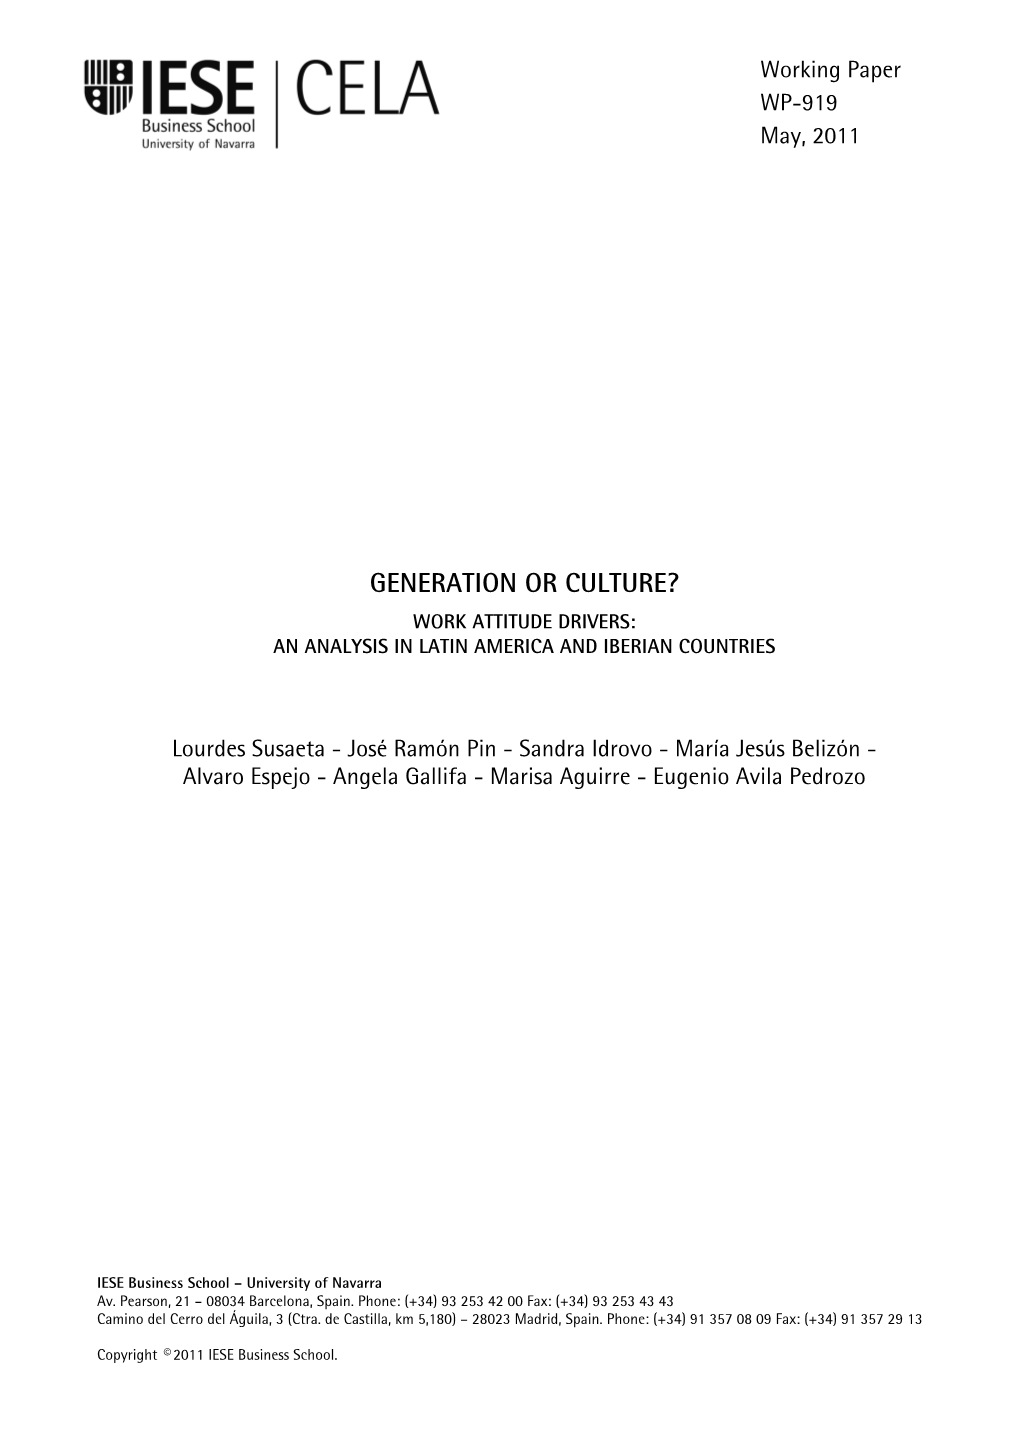 Generation Or Culture? Work Attitude Drivers: an Analysis in Latin America and Iberian Countries